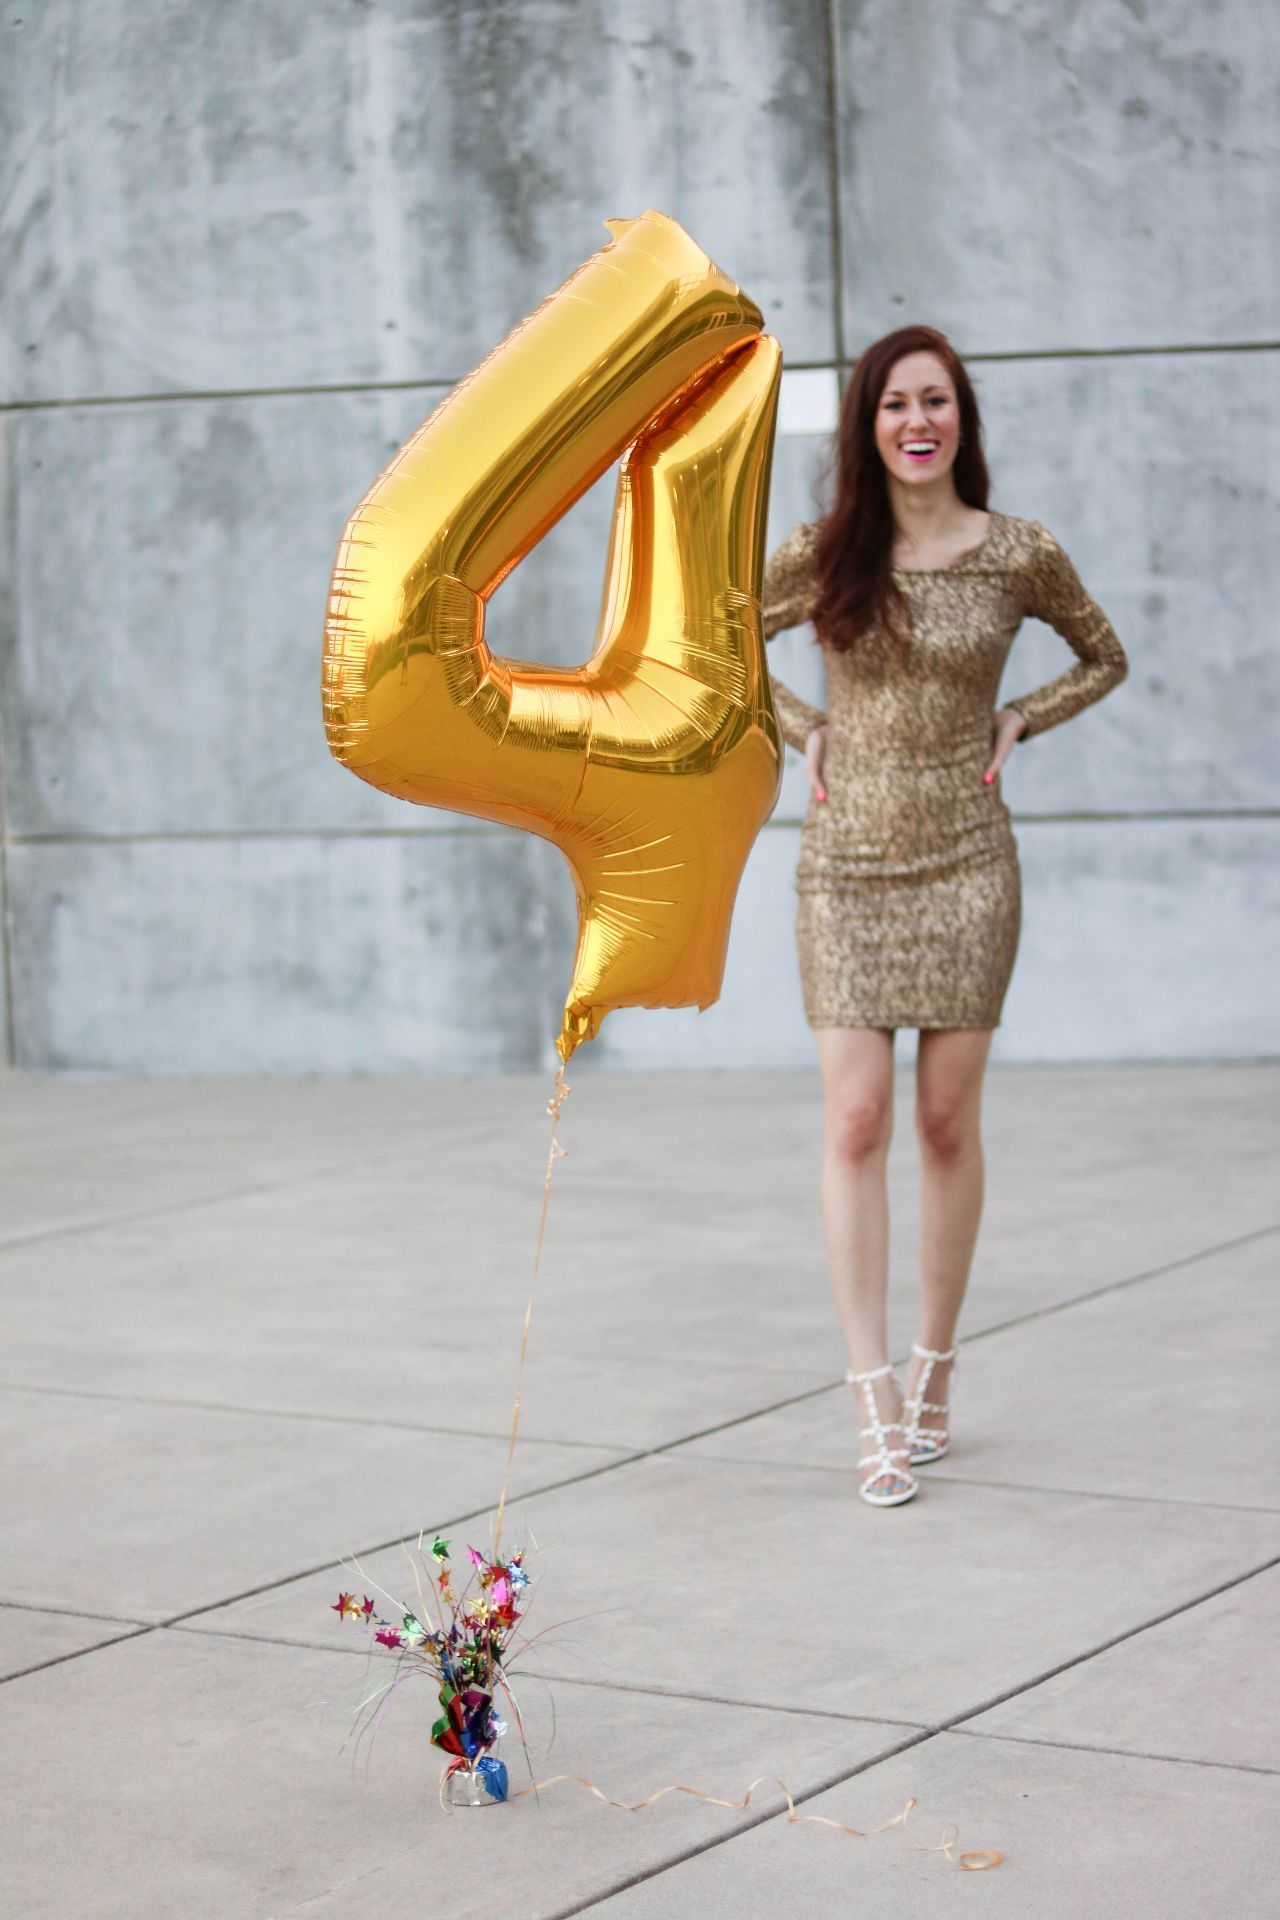 Blog Anniversary: 10 Lessons from 4 Years of Blogging